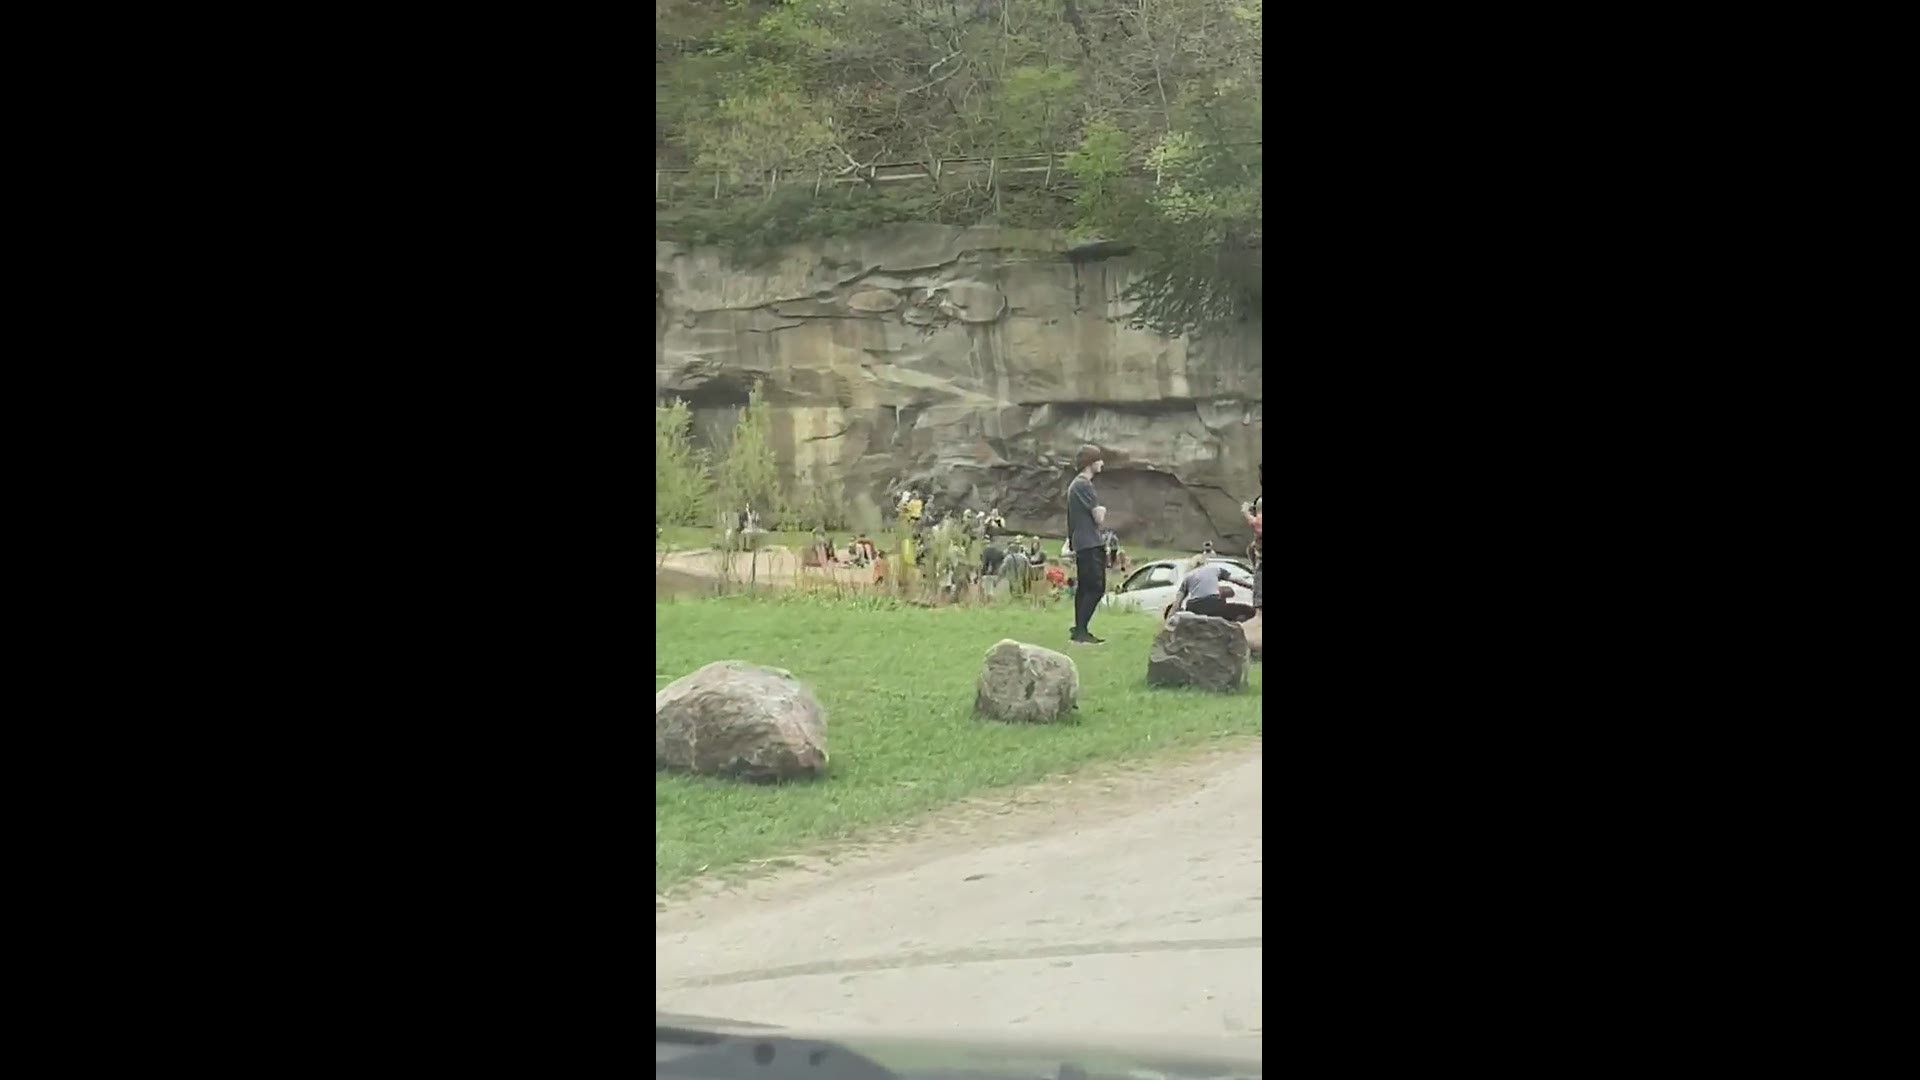 This video sent in from a viewer shows people at Ledges State Park crowding a pond area.